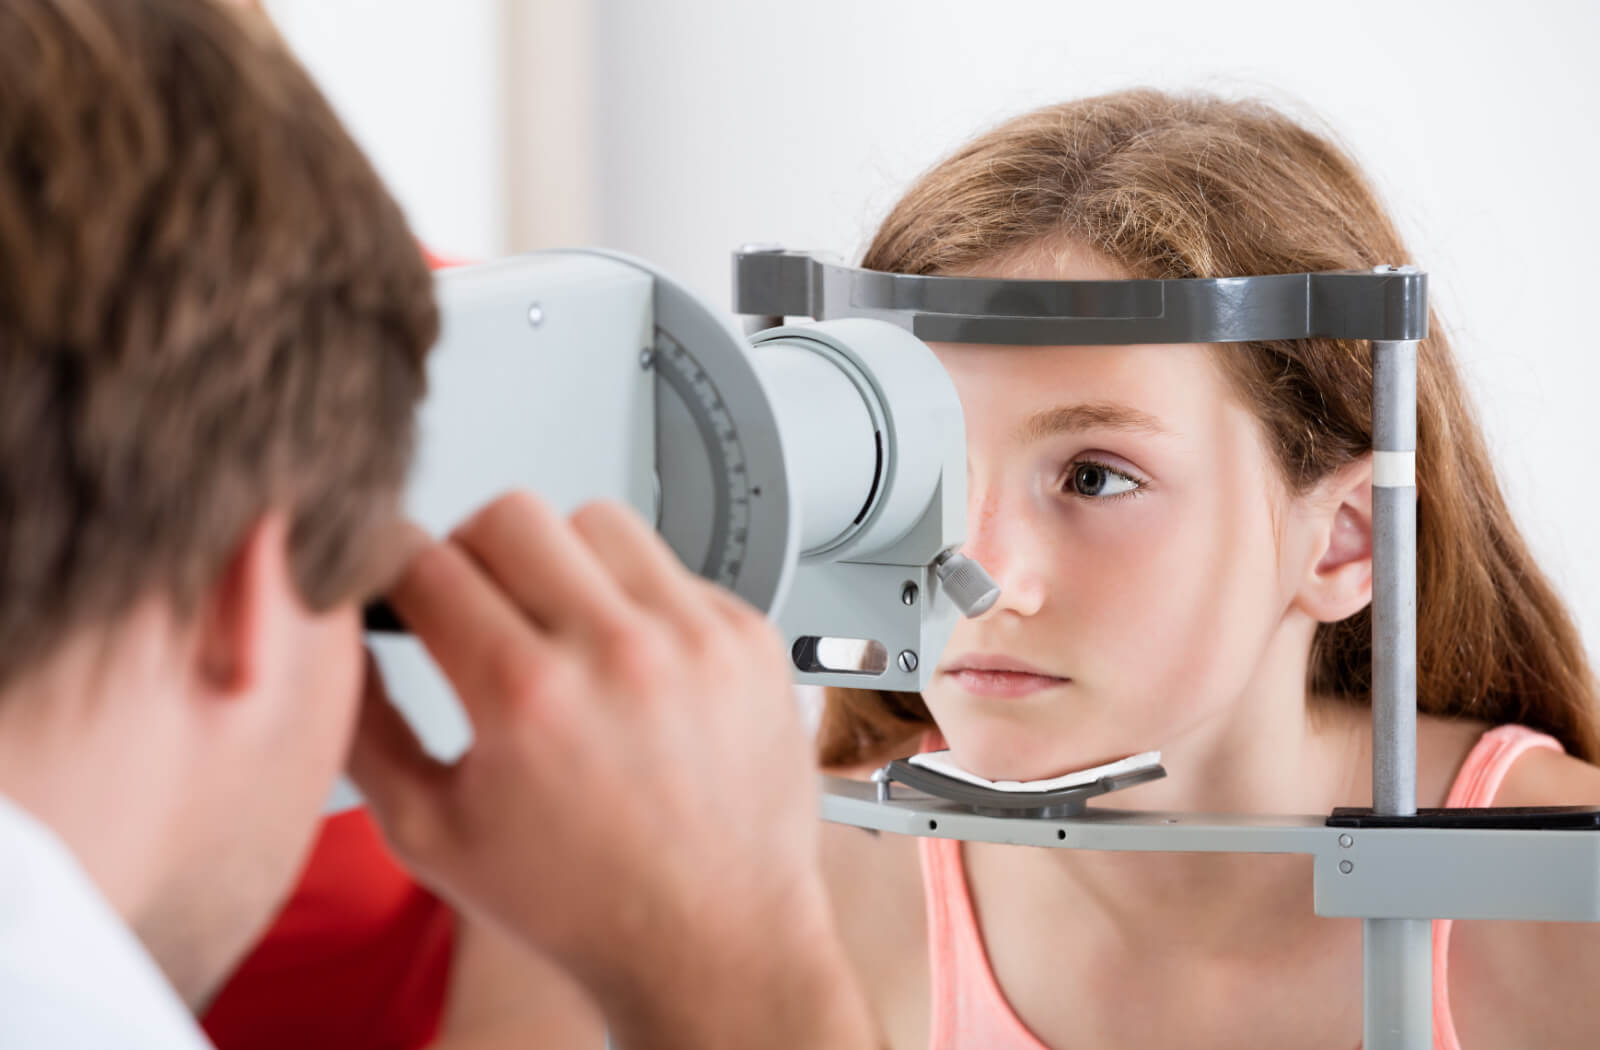 An optometrist smiling and conducting an eye exam on a child using a device that tests her vision.